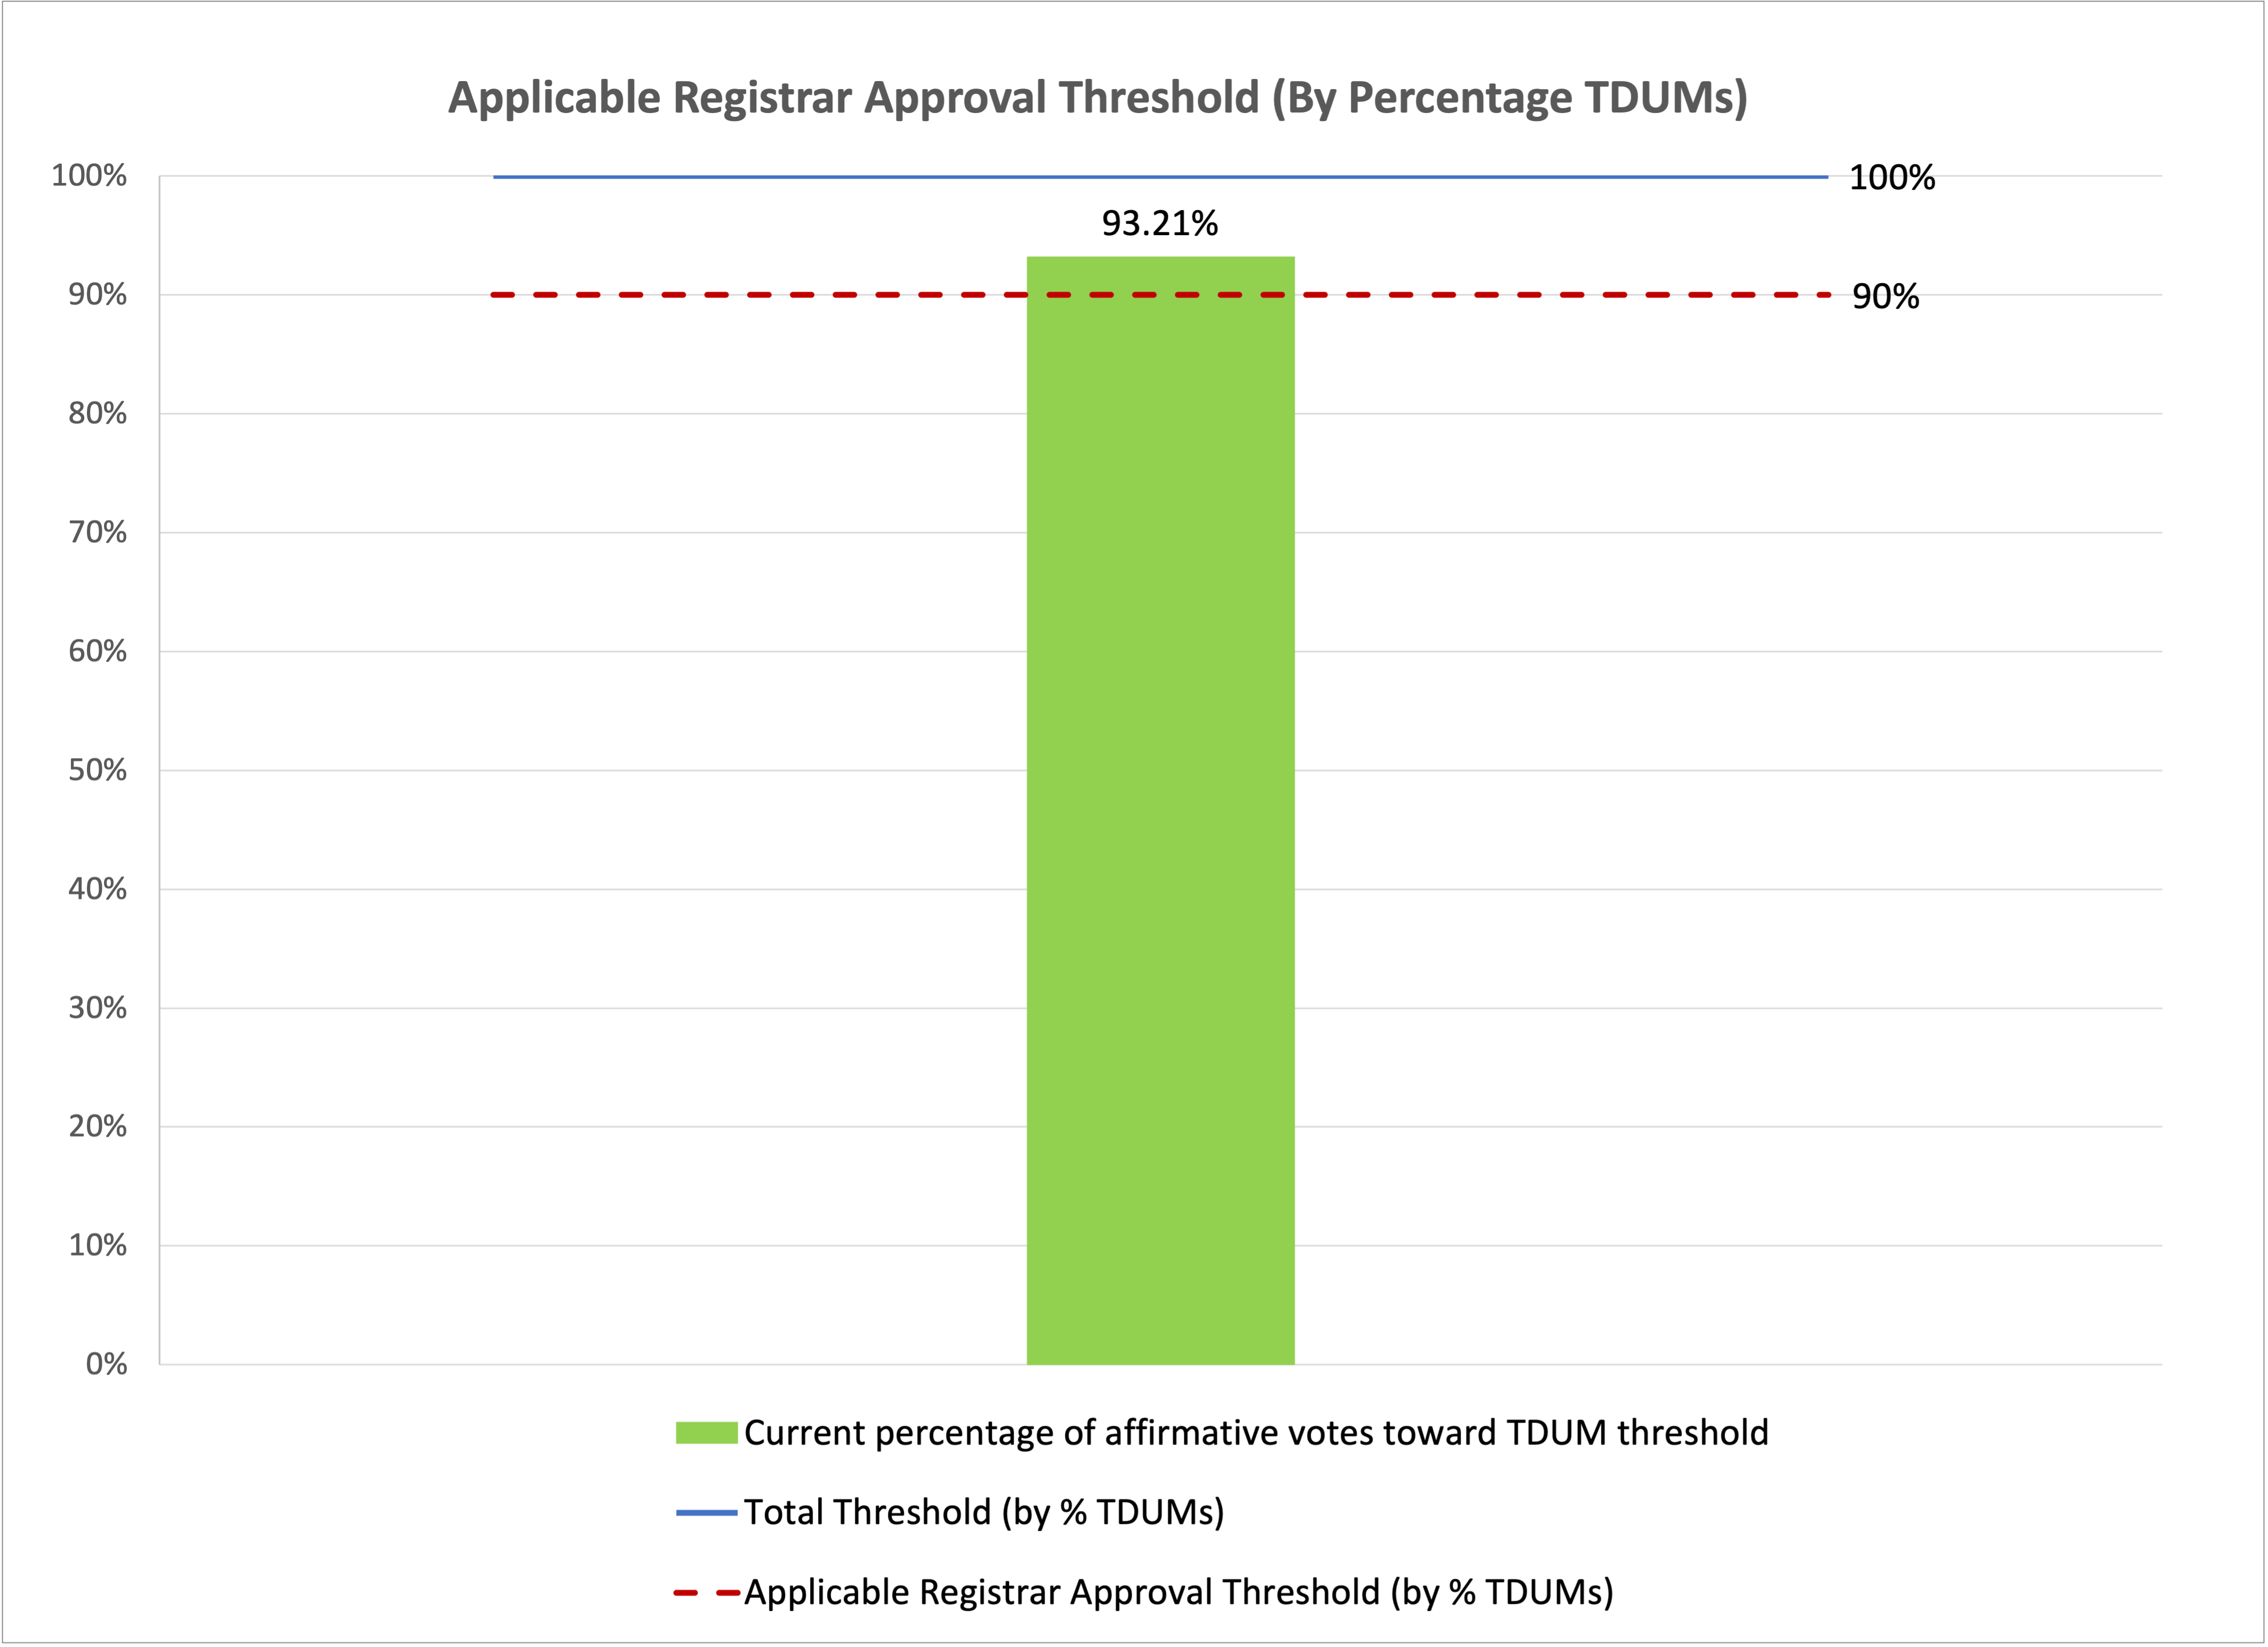 Bar chart of the progress of the vote towards meeting the percentage of total domain names under management (TDUMs) threshold for Applicable Registrars. The TDUMs approval threshold is 90%, with current affirmative votes towards the threshold at 93.21%